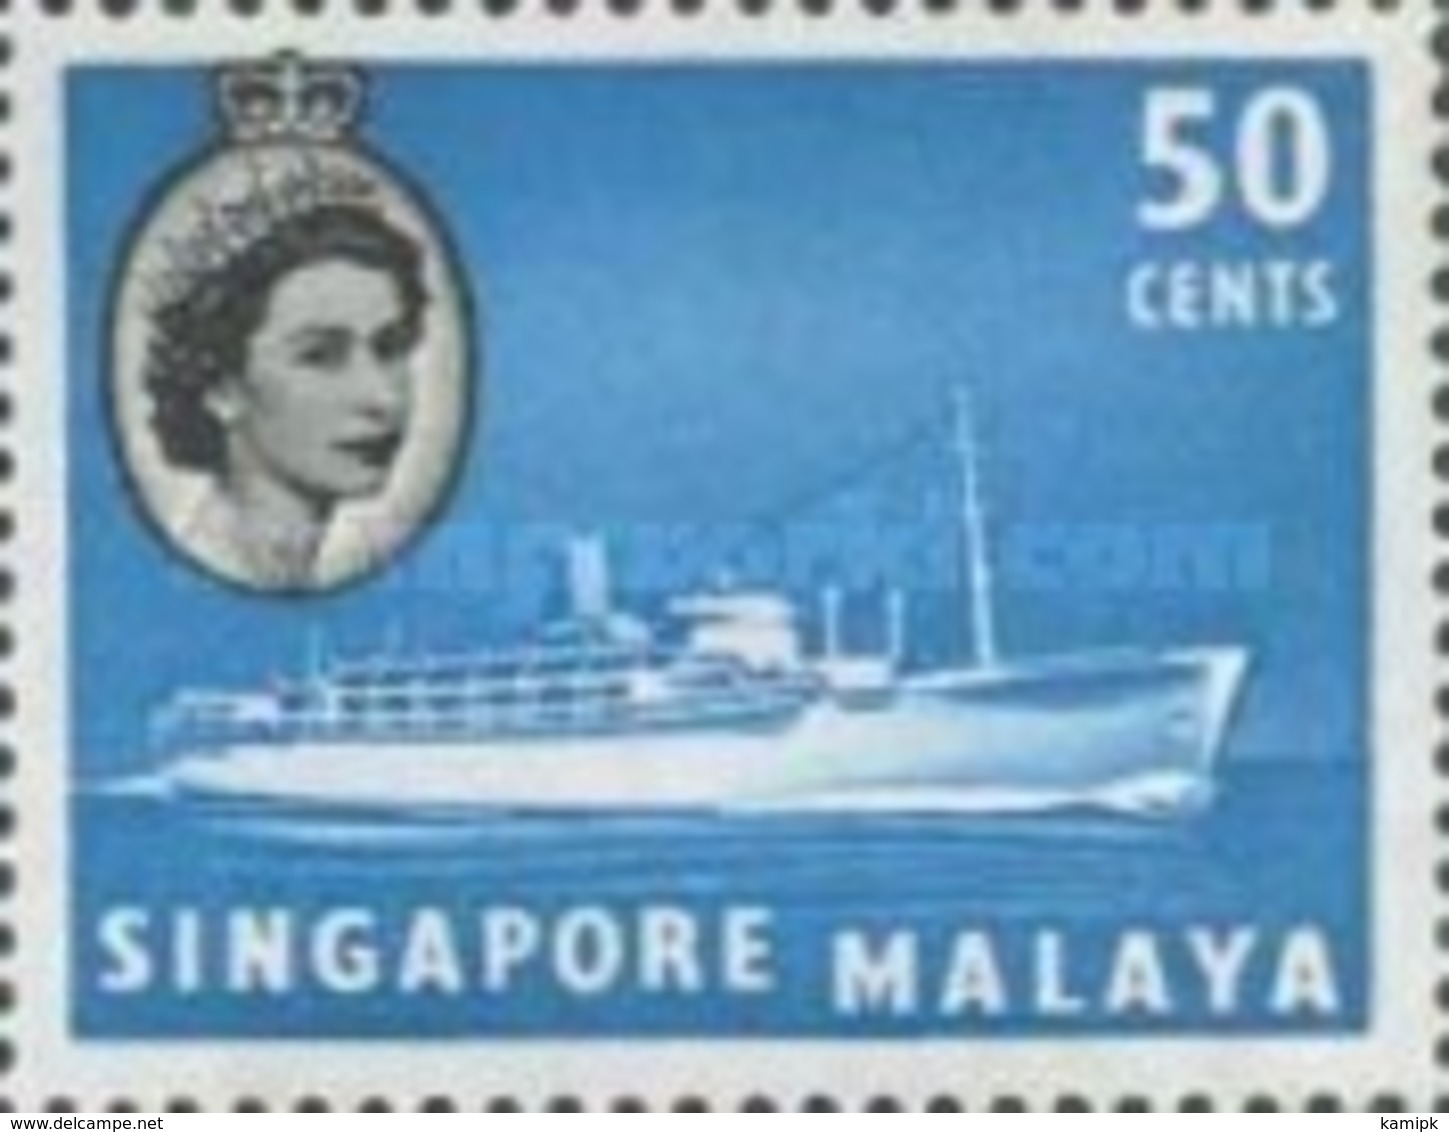 SINGAPORE MALAYA  USED STAMPS  Queen Elizabeth II, Ships and Other Image-1955